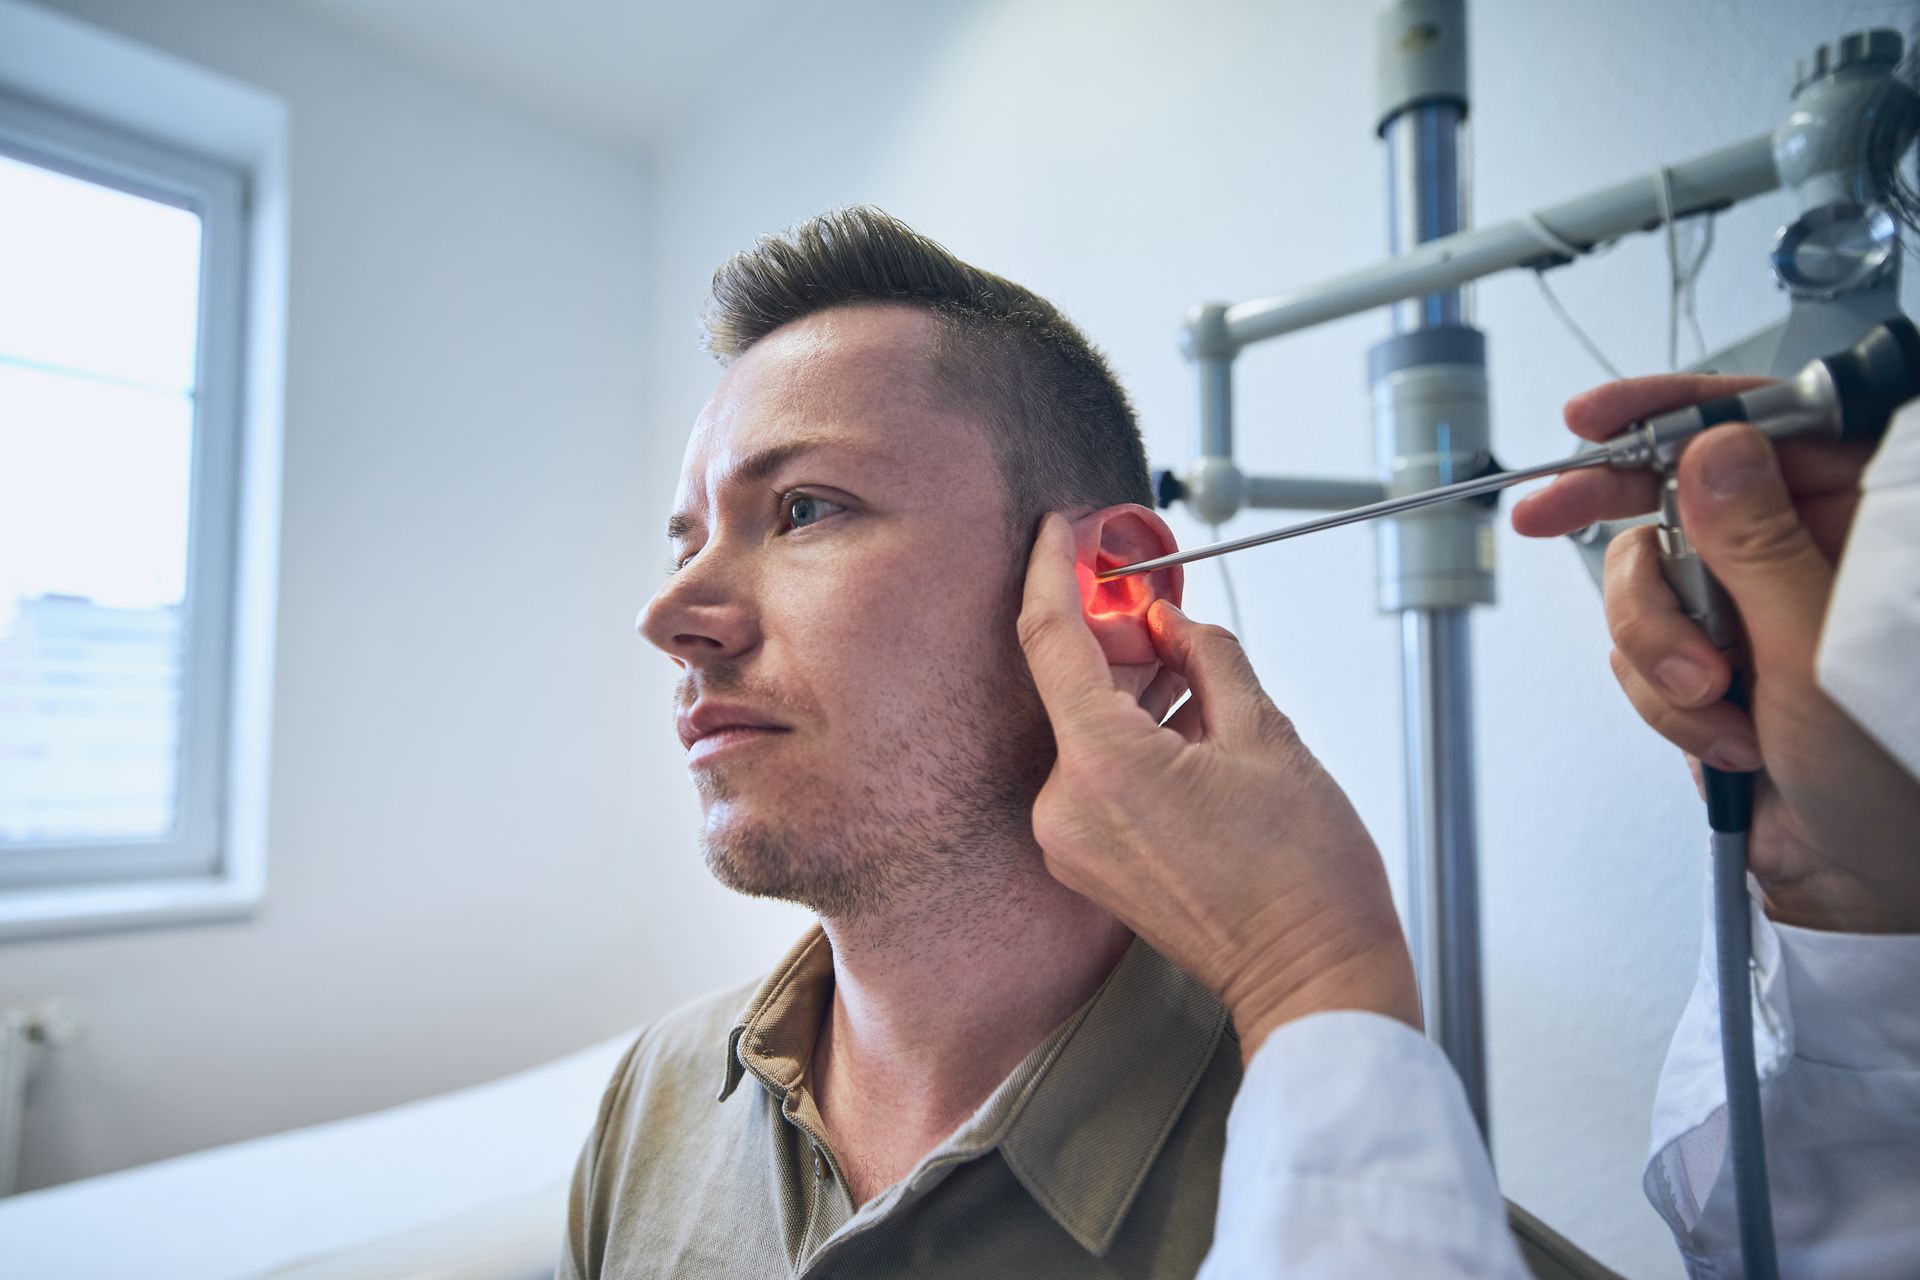 A man is getting his ear examined by a doctor.